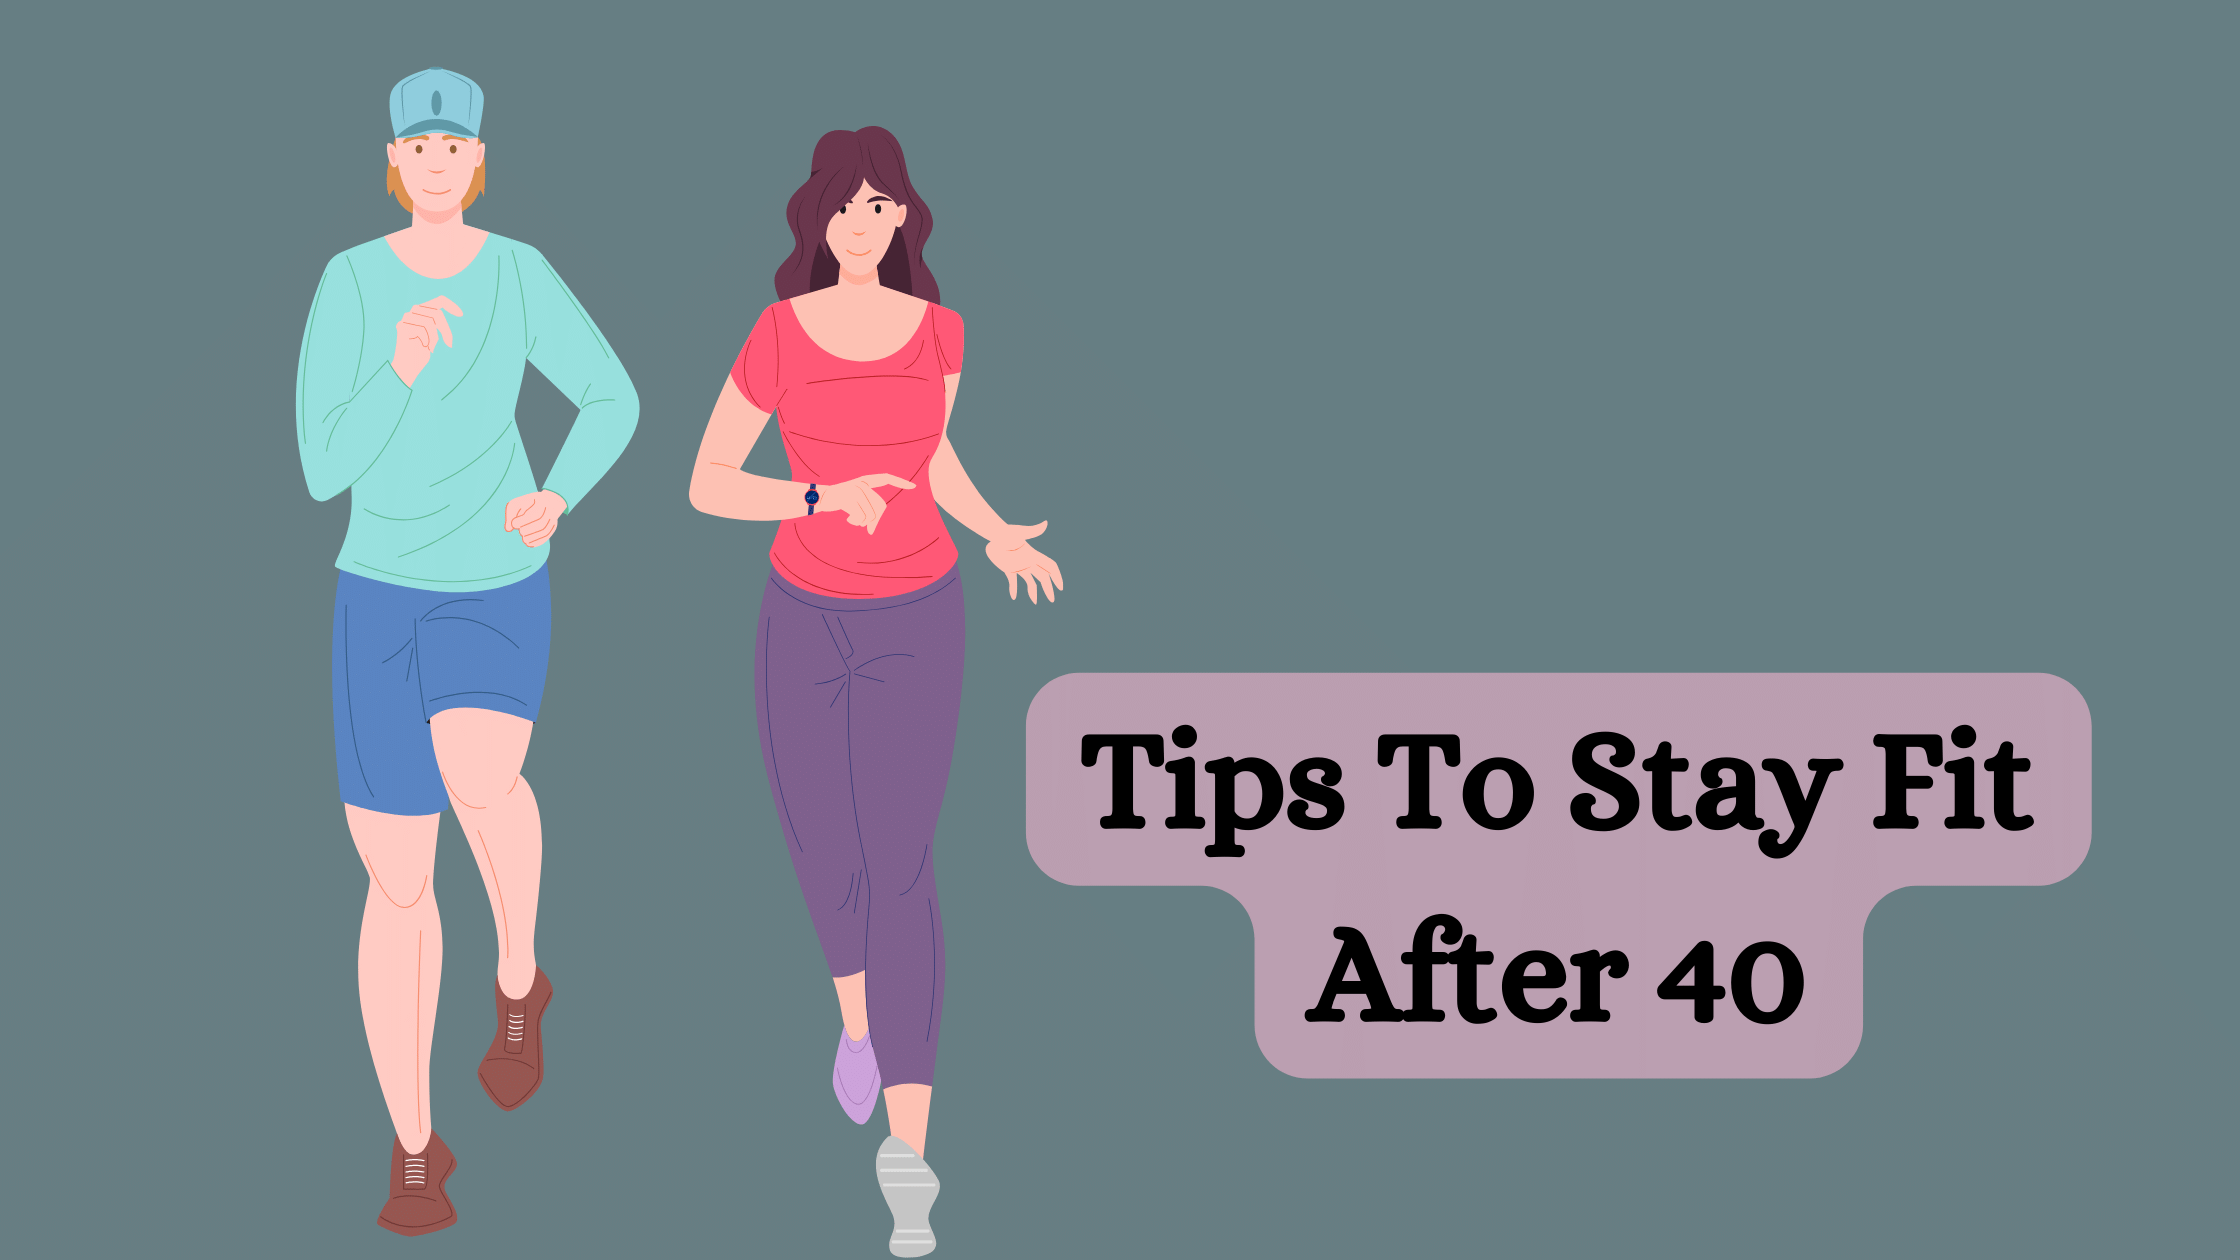 Tips To Stay Fit After 40